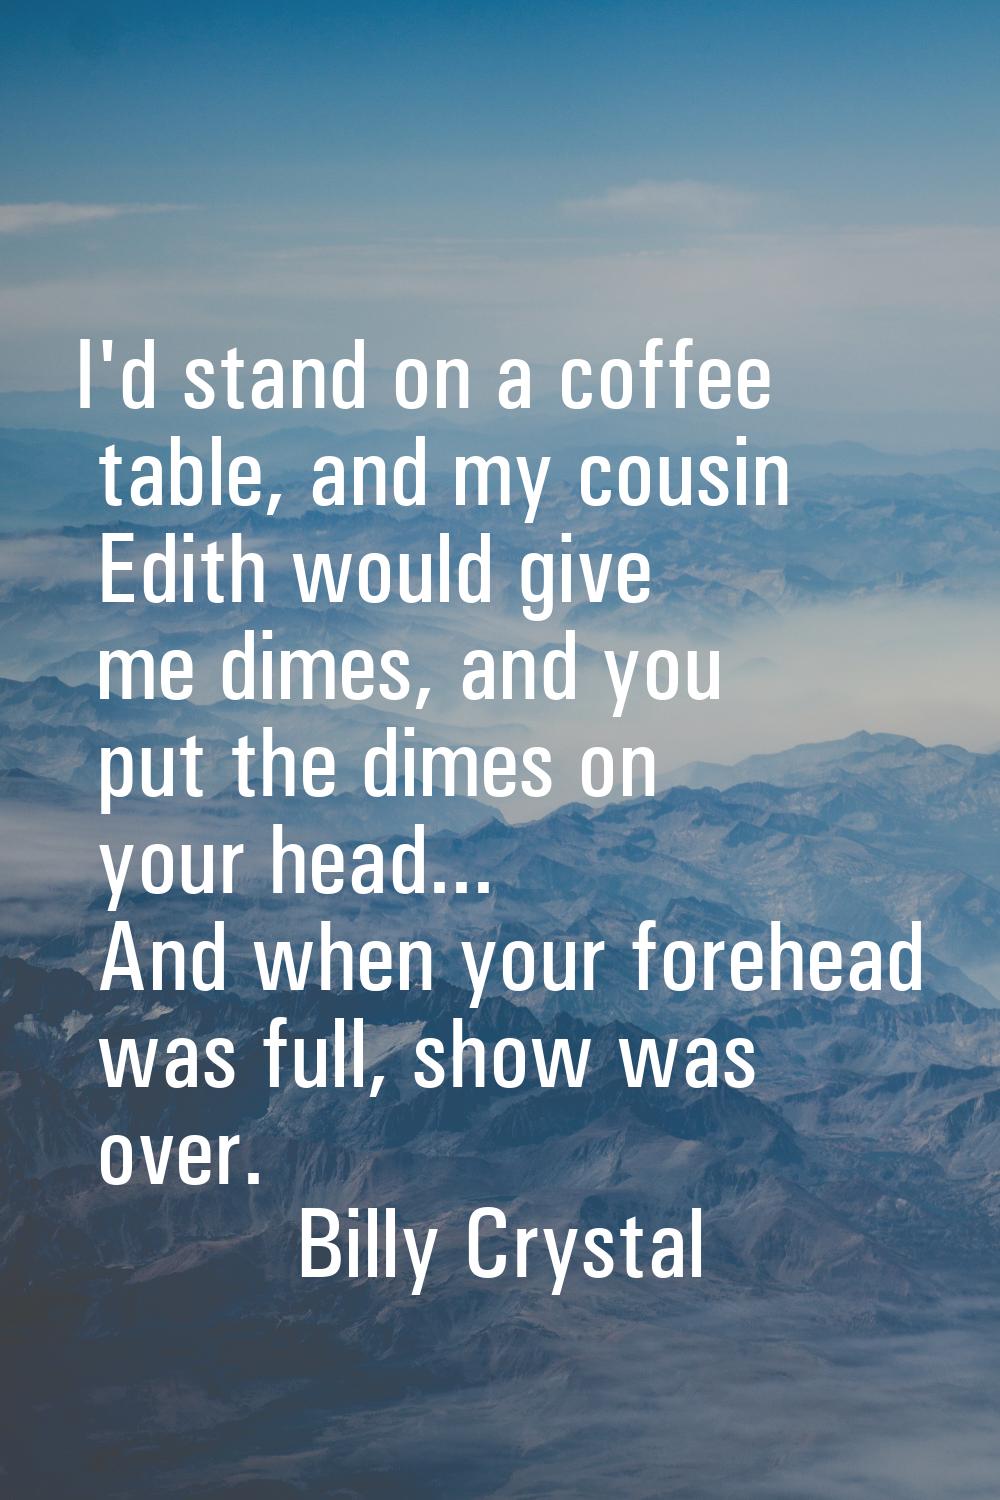 I'd stand on a coffee table, and my cousin Edith would give me dimes, and you put the dimes on your